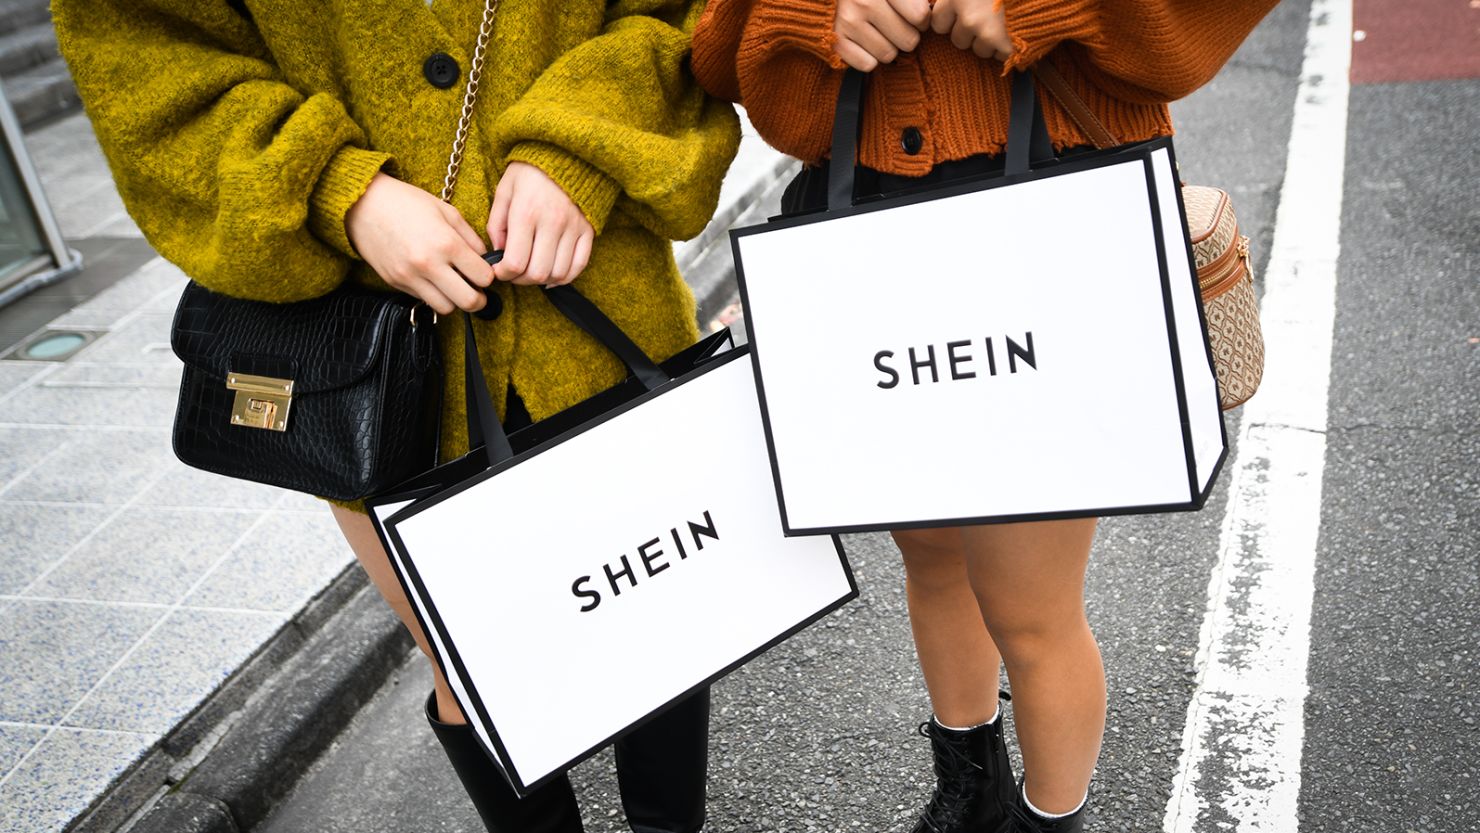 eCommerce Giant Shein Sees Sales Slow